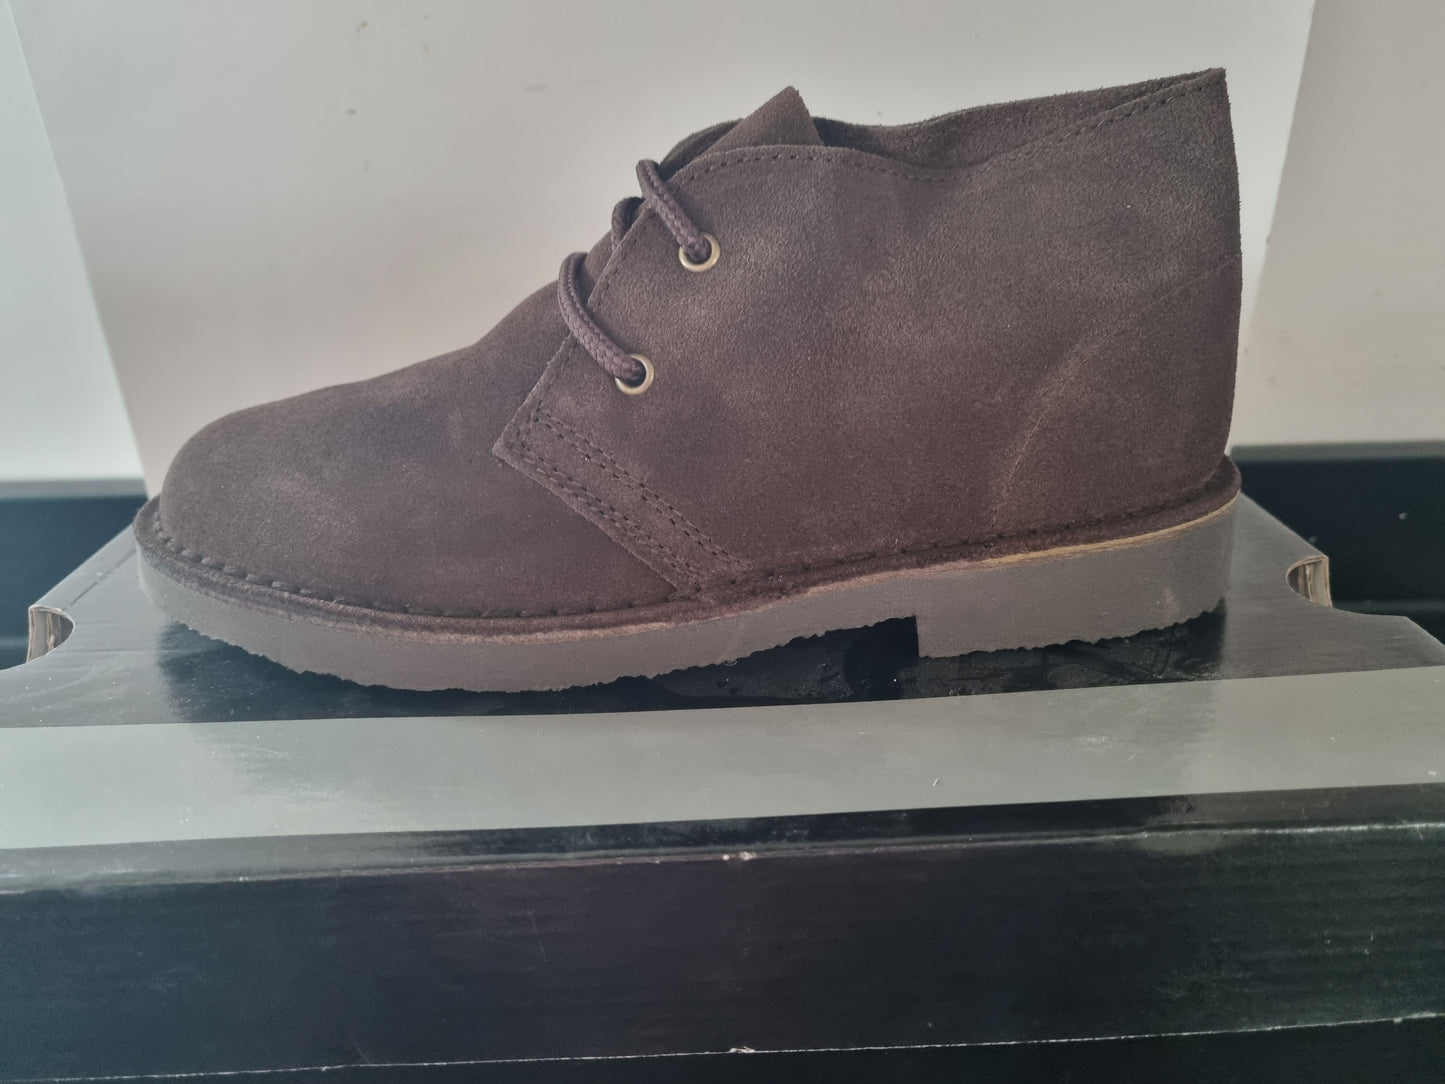 Desert Boot by Roamers - 2 Eye Chocolate Suede Leather (M467DBS)